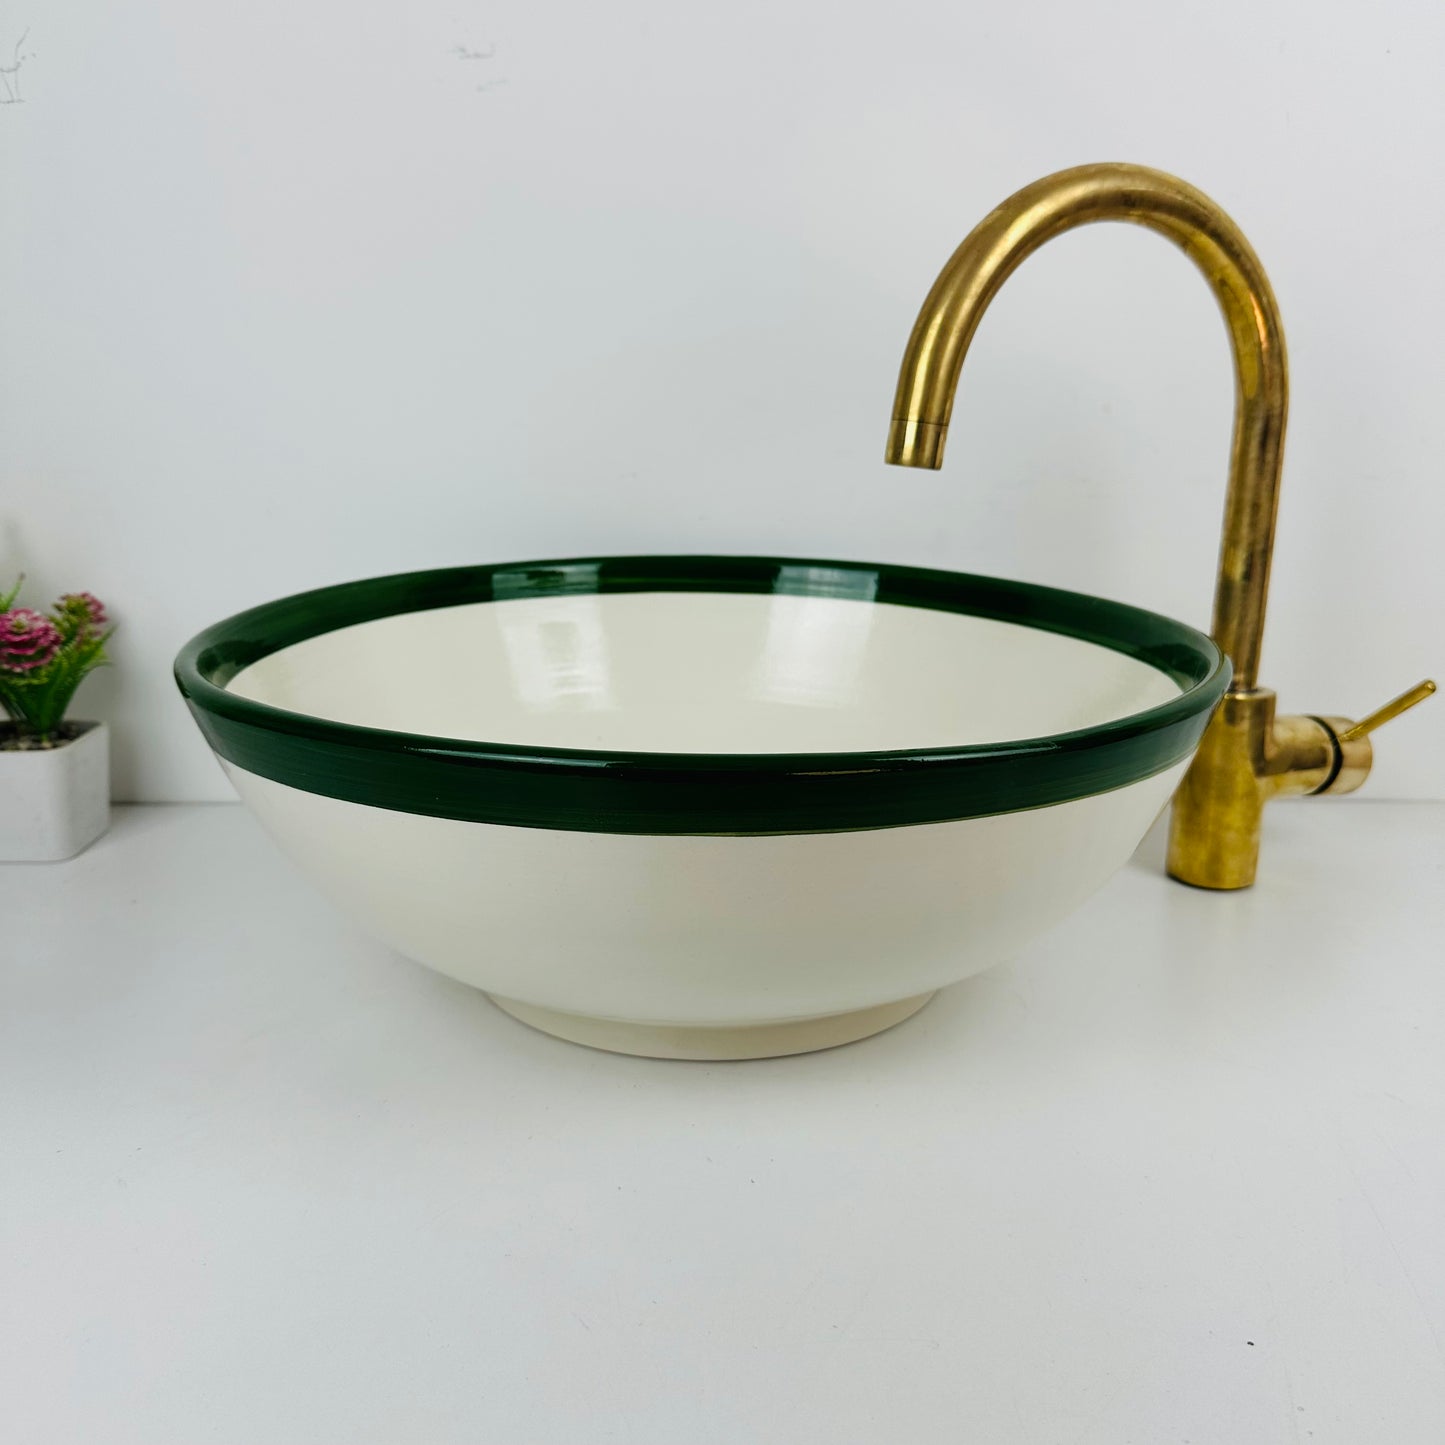 Round Elegance: Handcrafted Ceramic Sink with Green Top Finish